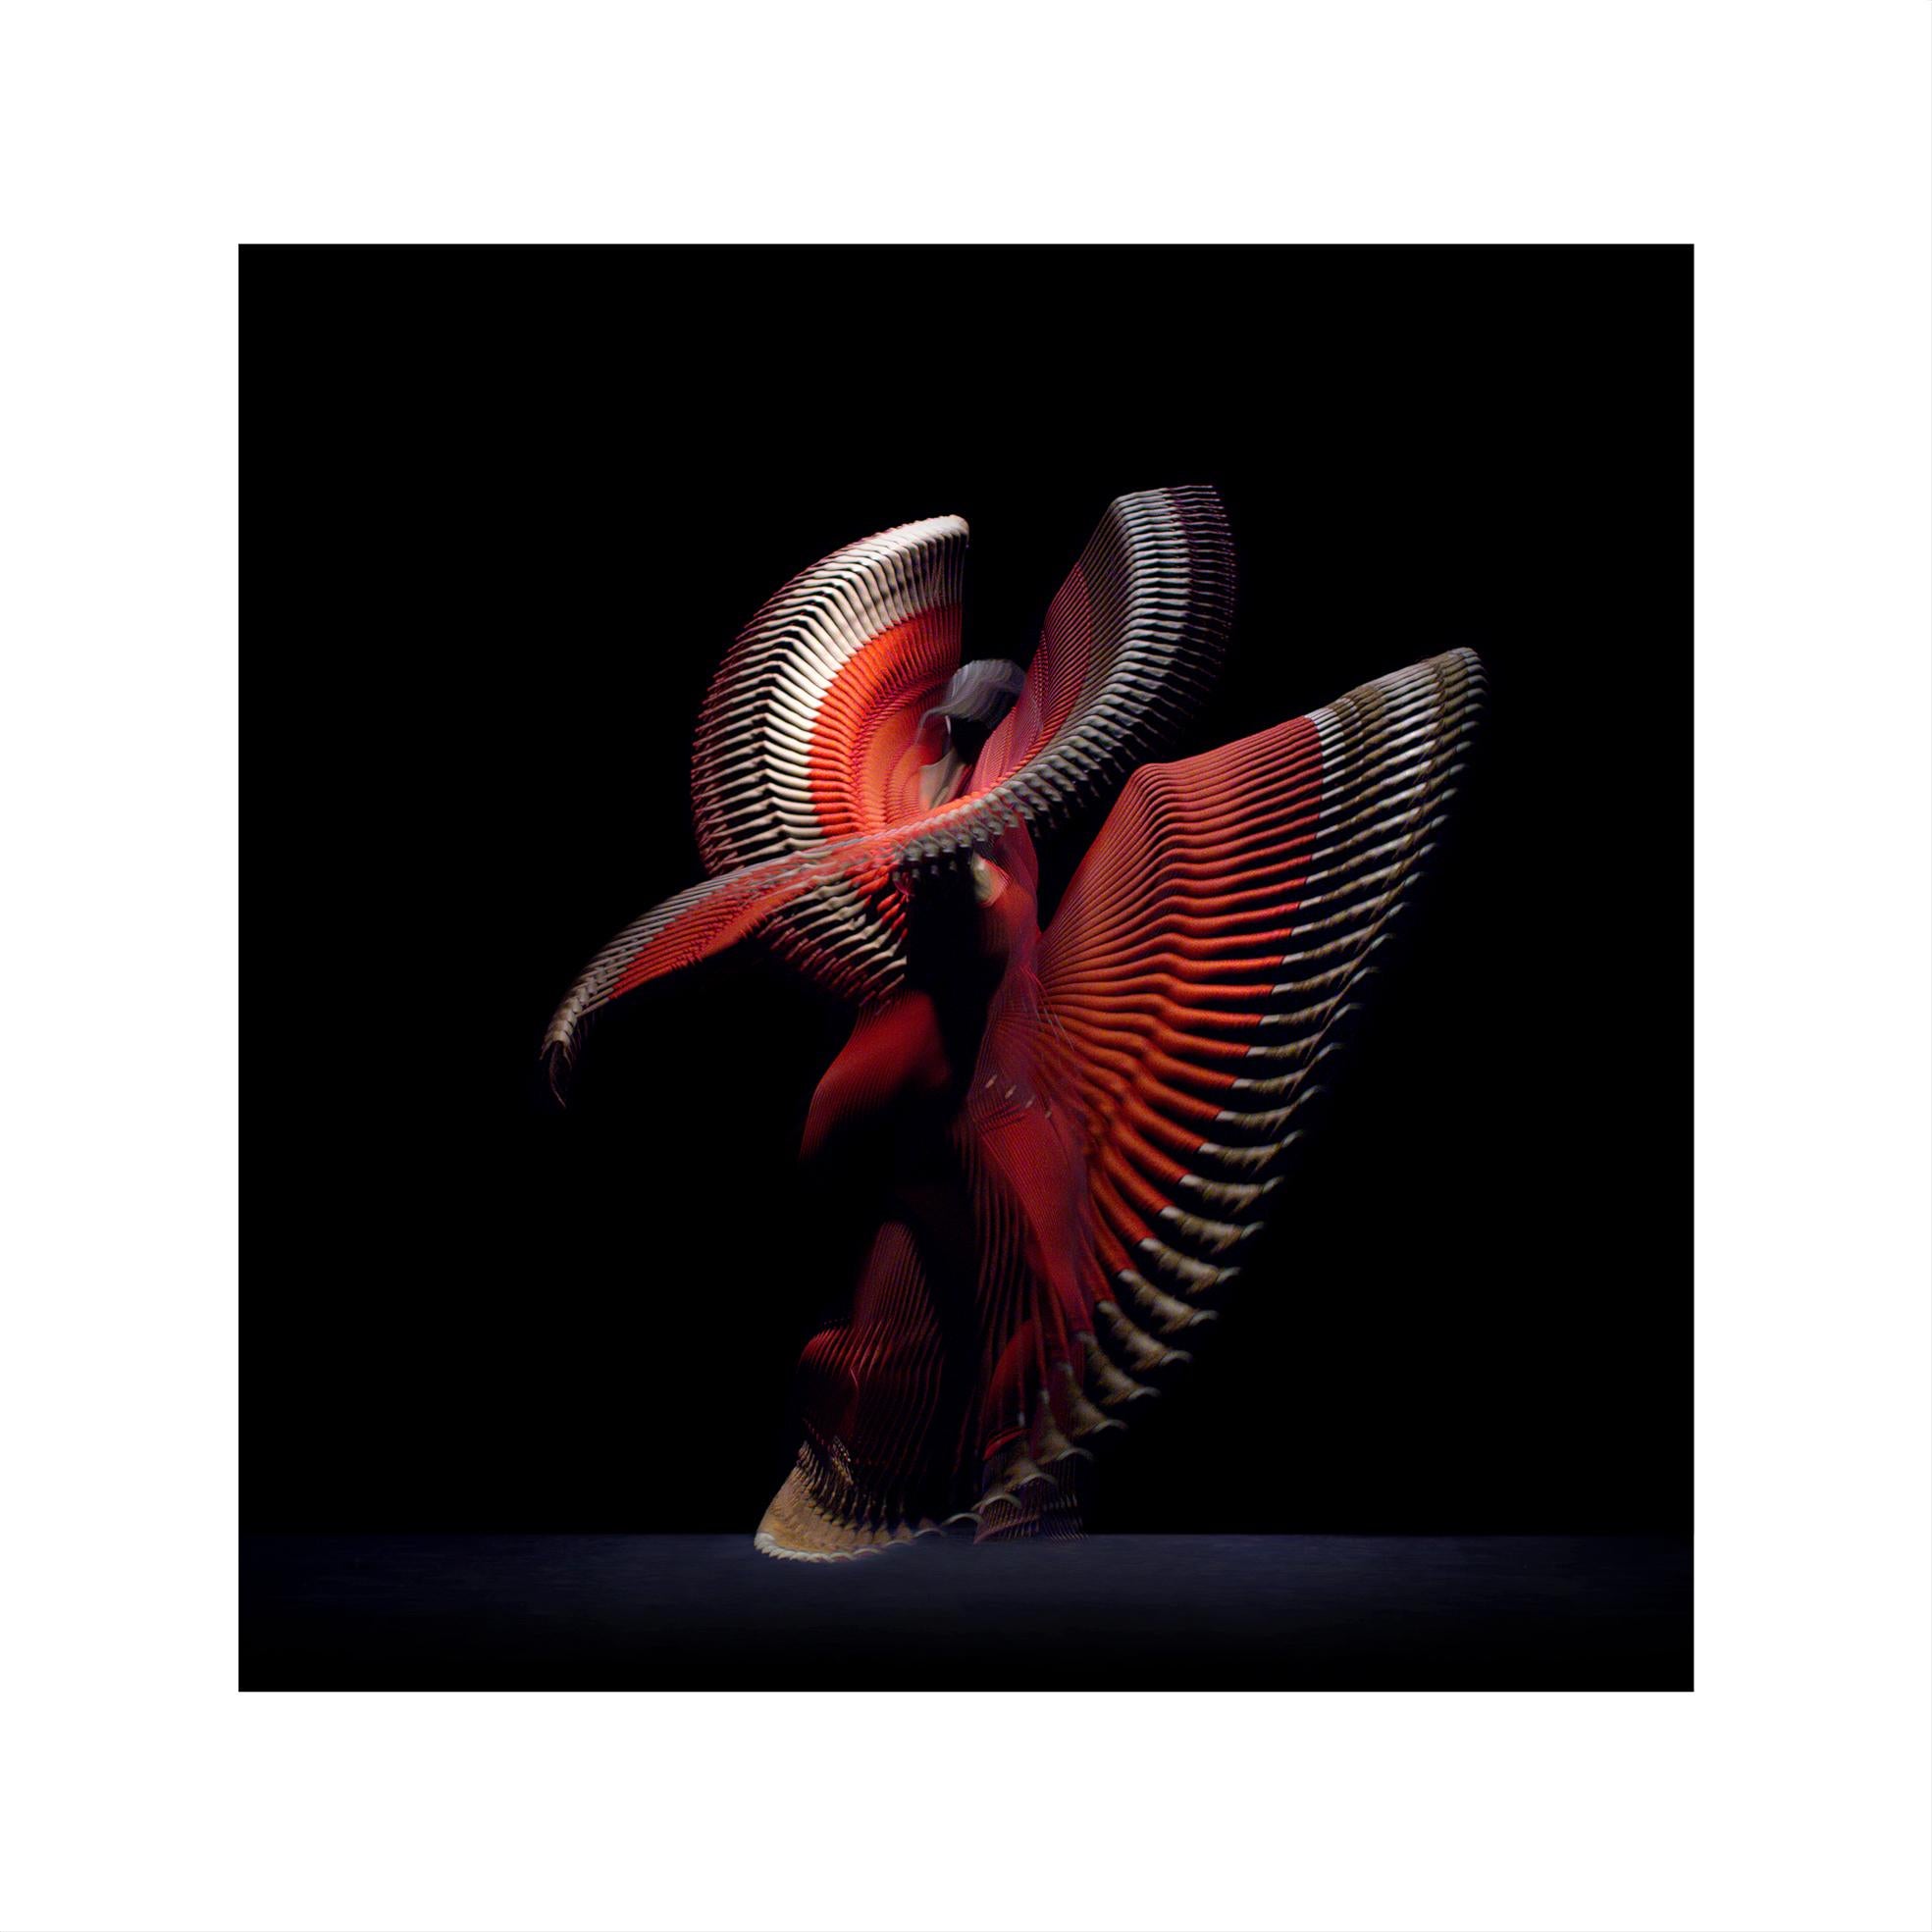 Giles Revell      Figurative Photograph - Abstract Dancers, Red 7, 2019 by Giles Revell - Photography, Print, Ballet